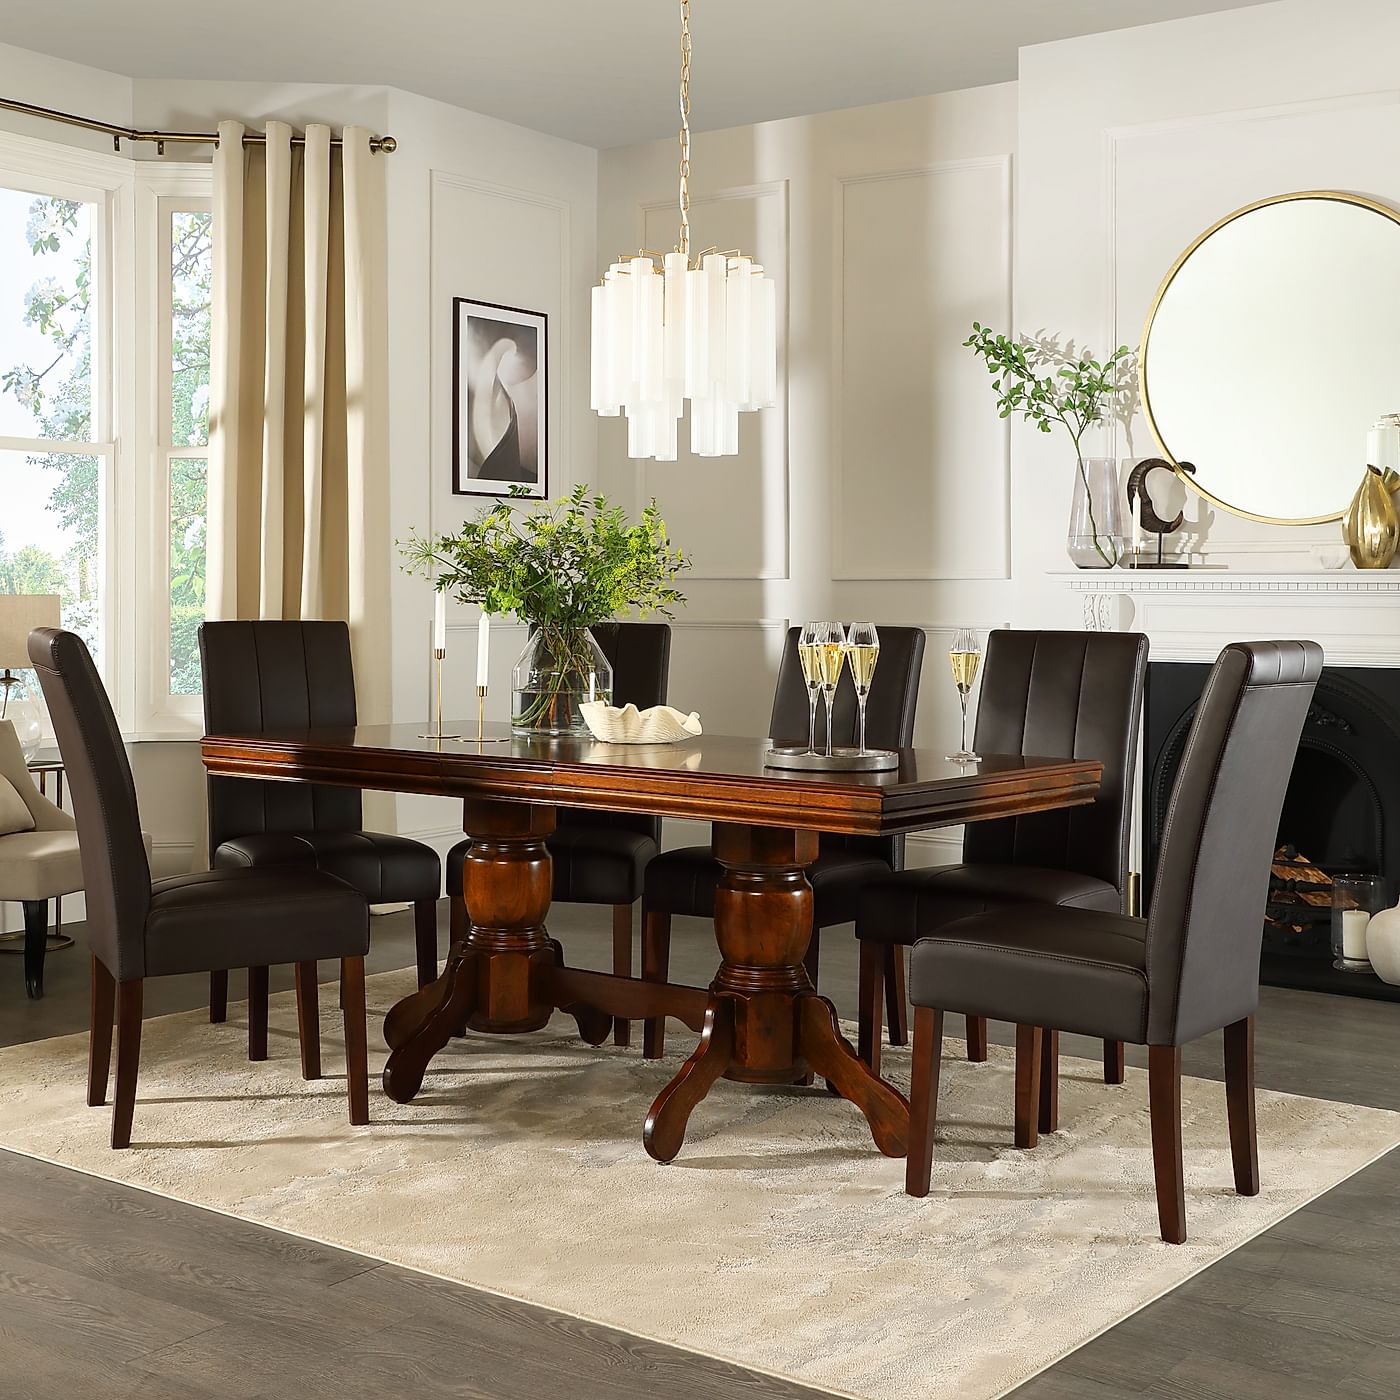 Chatsworth Dark Wood Extending Dining Table with 6 Carrick Brown